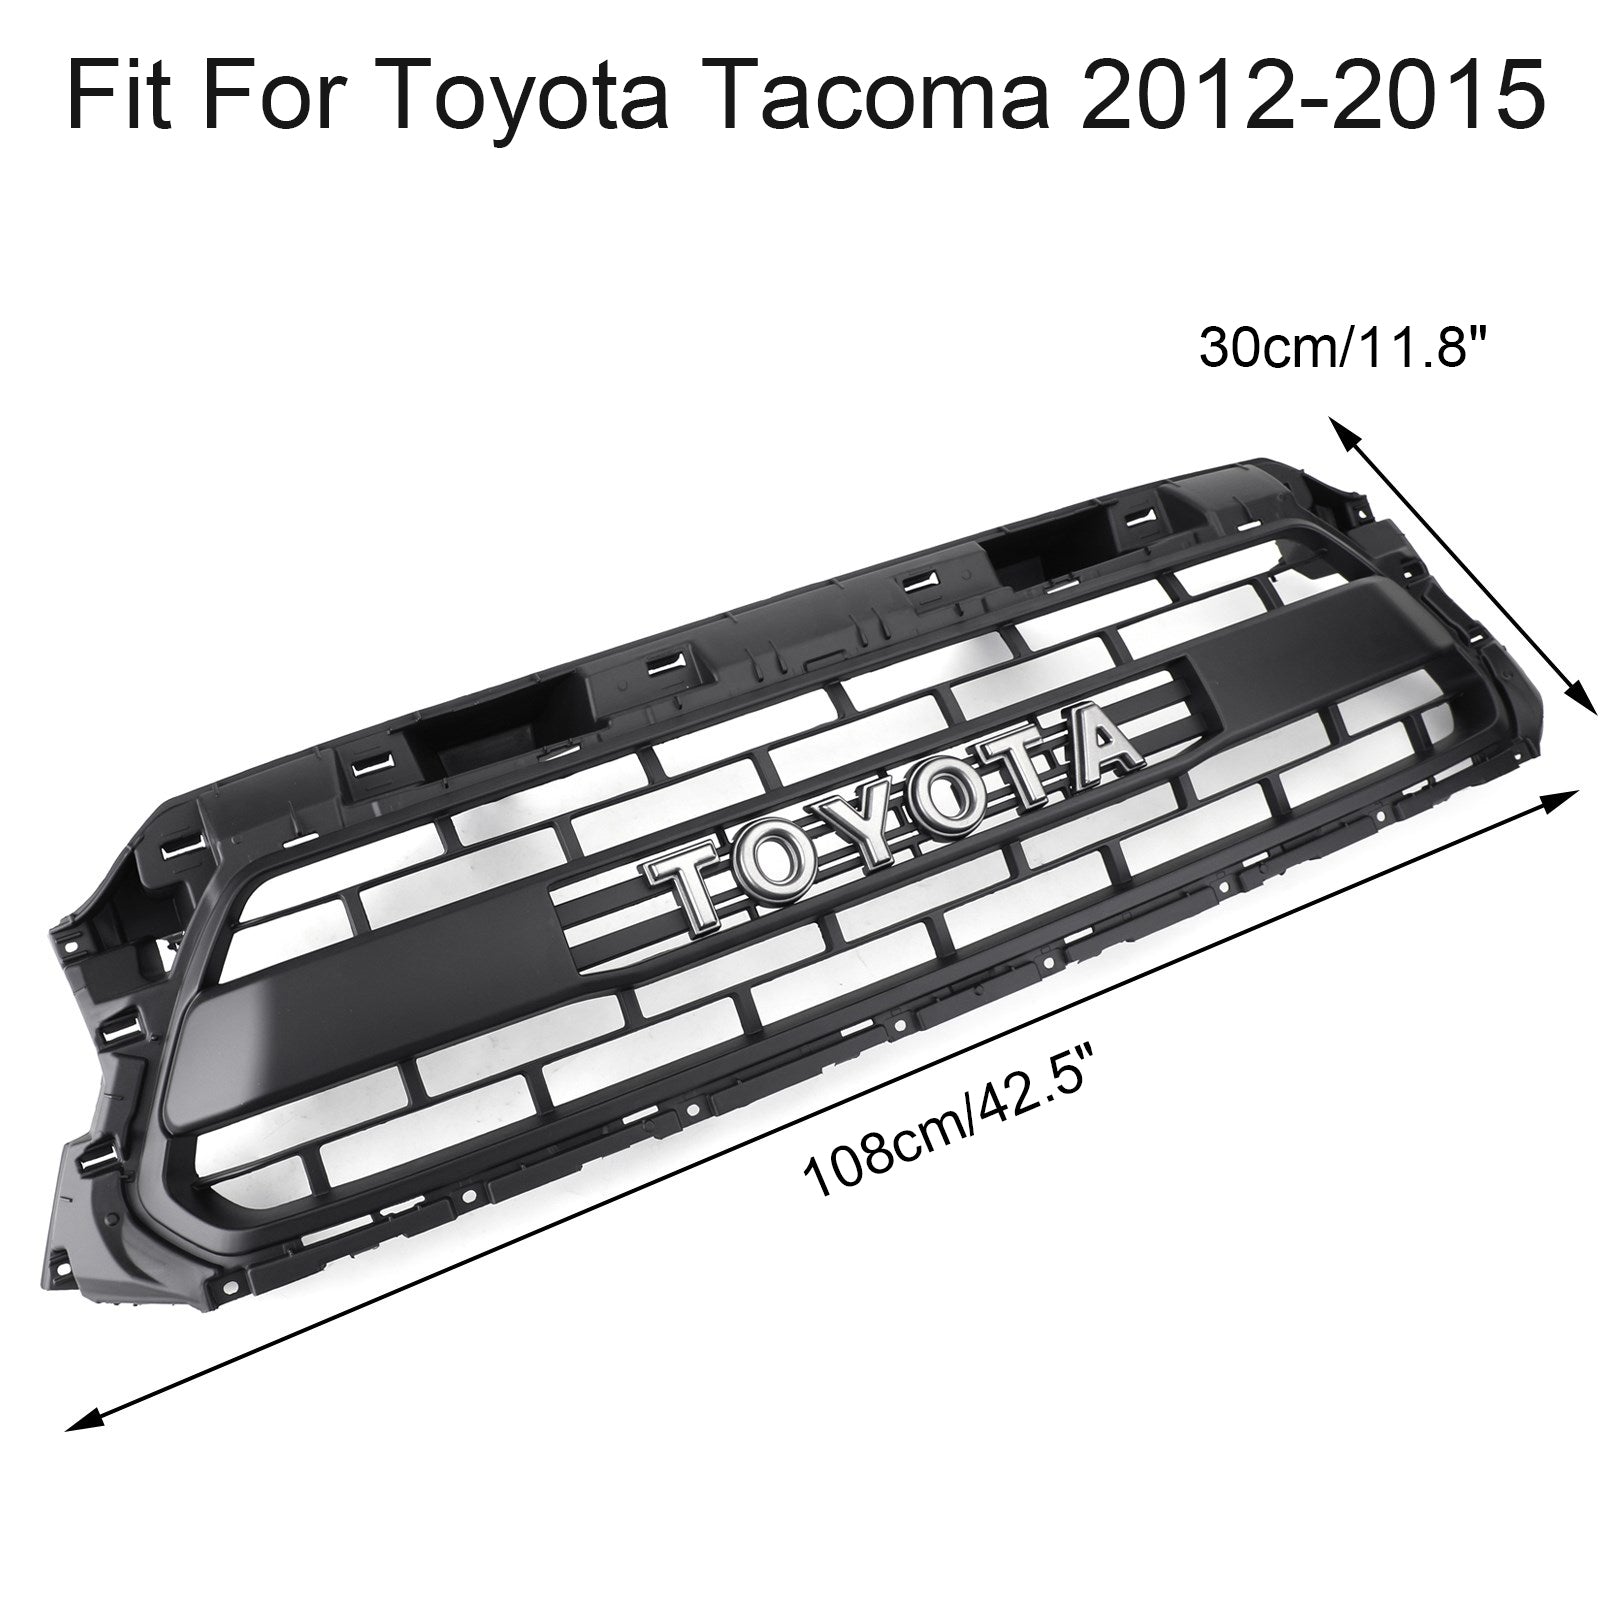 2012-2013-2014-2015 Toyota Tacoma Honeycomb Grill Replacement Grille Generic